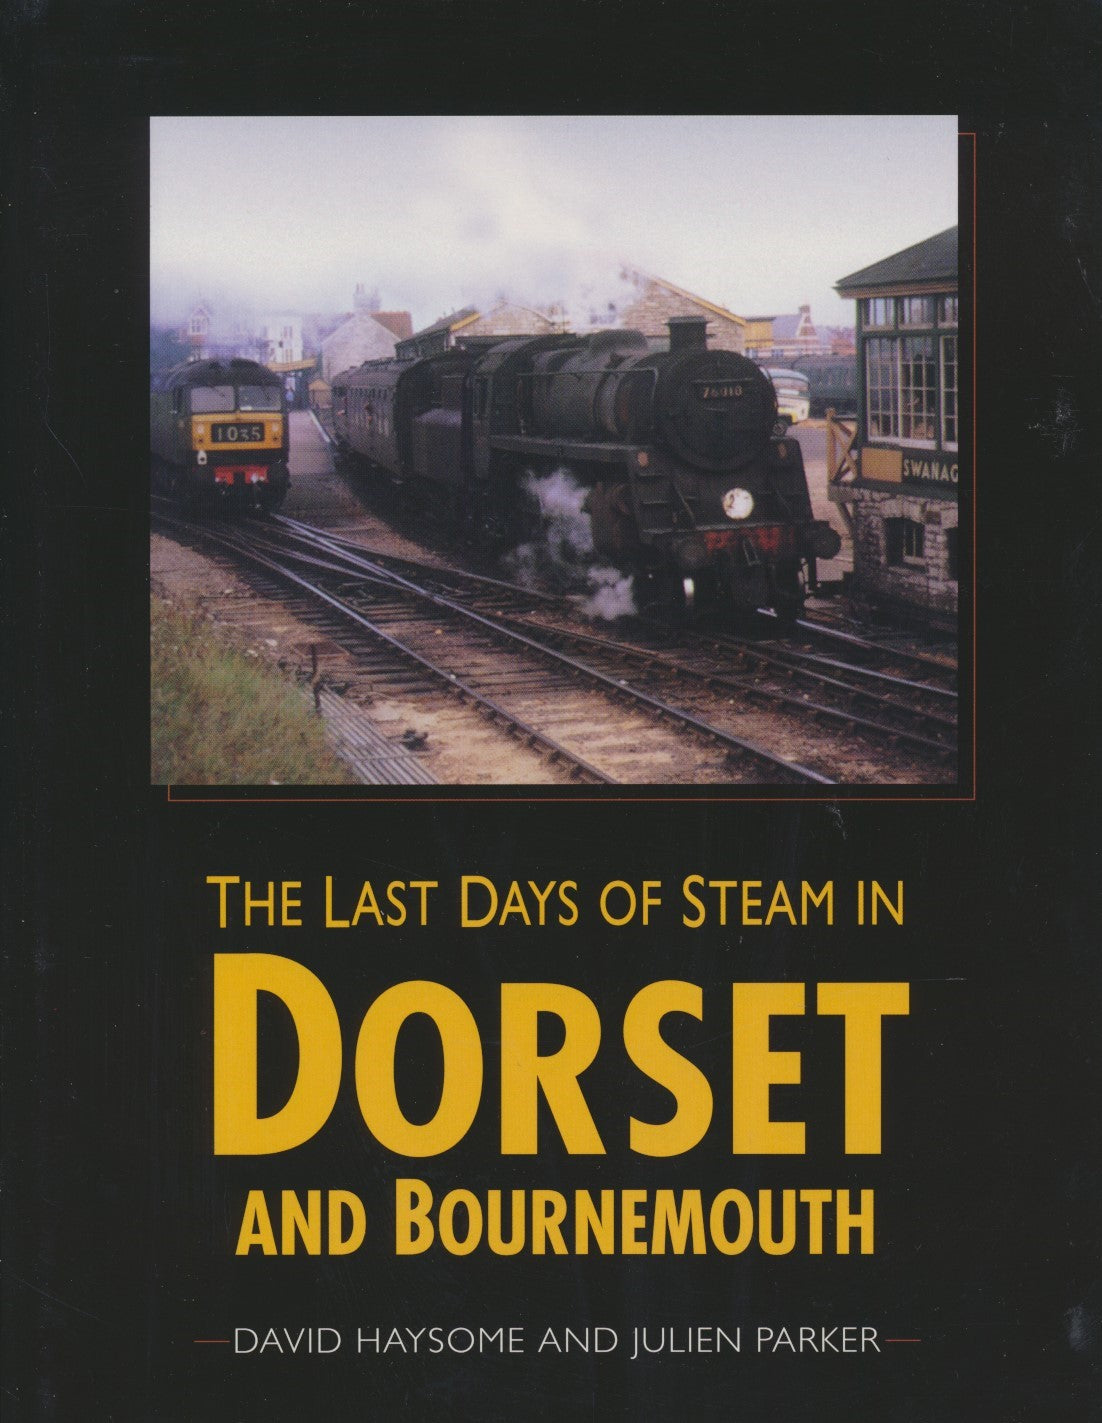 The Last Days of Steam in Dorset and Bournemouth